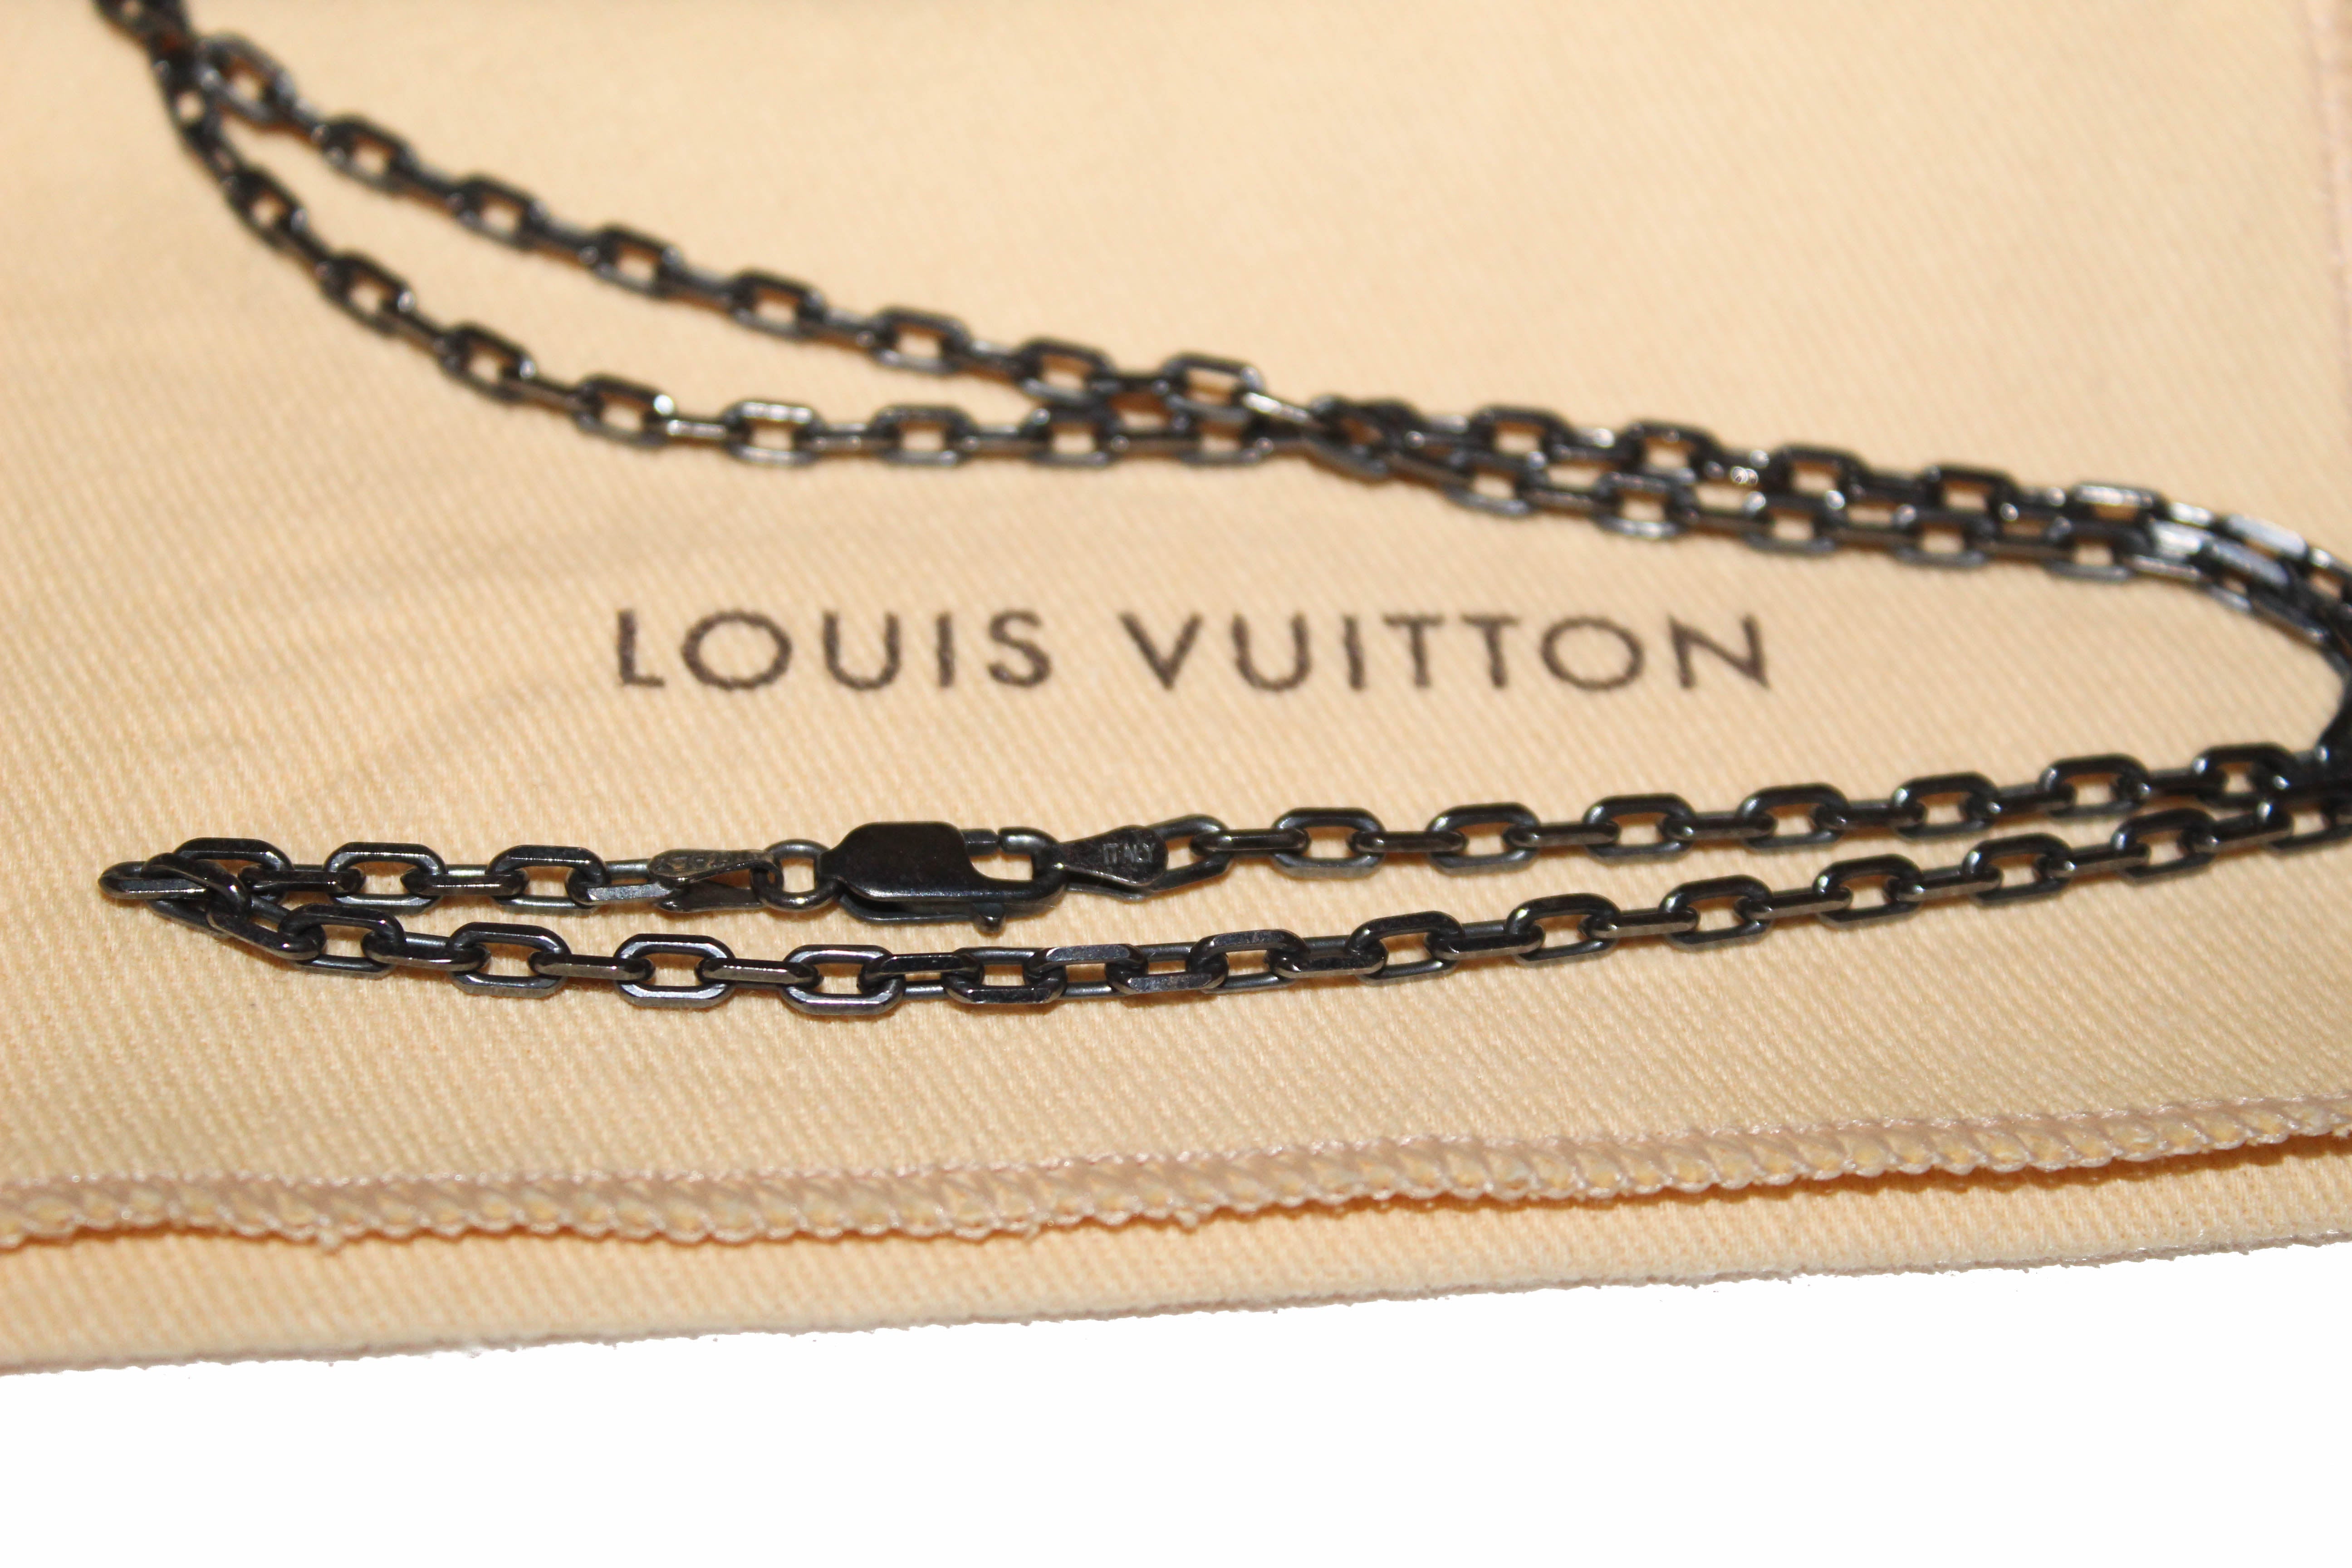 How to Shorten the Strap on your Louis Vuitton Felicie Chain